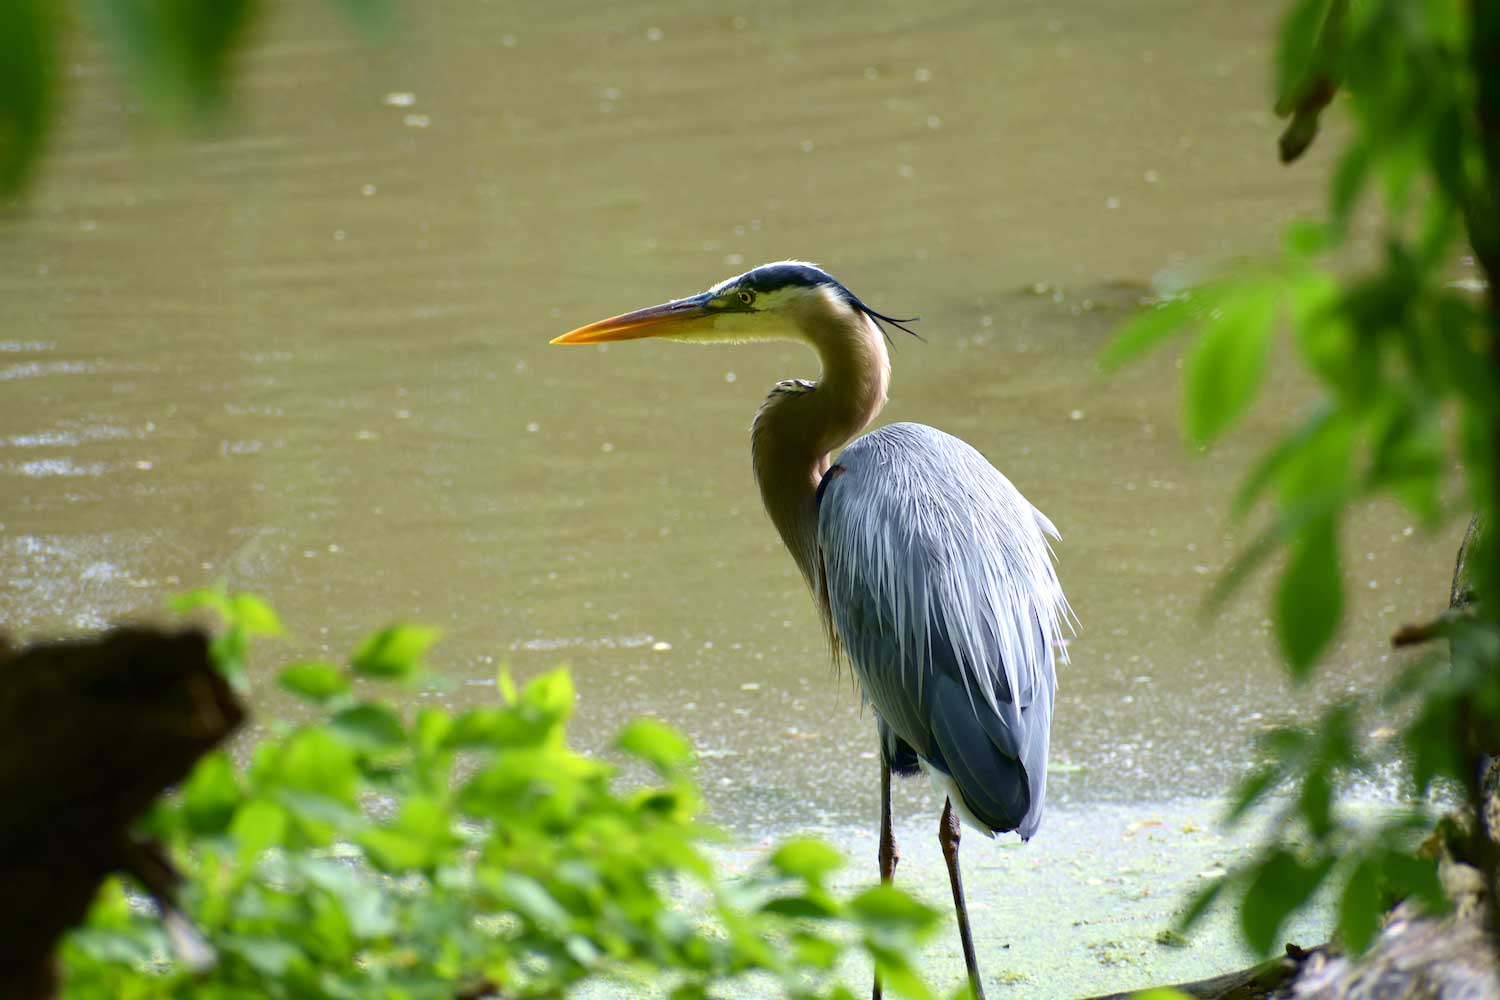 A great blue heron standing in the water.